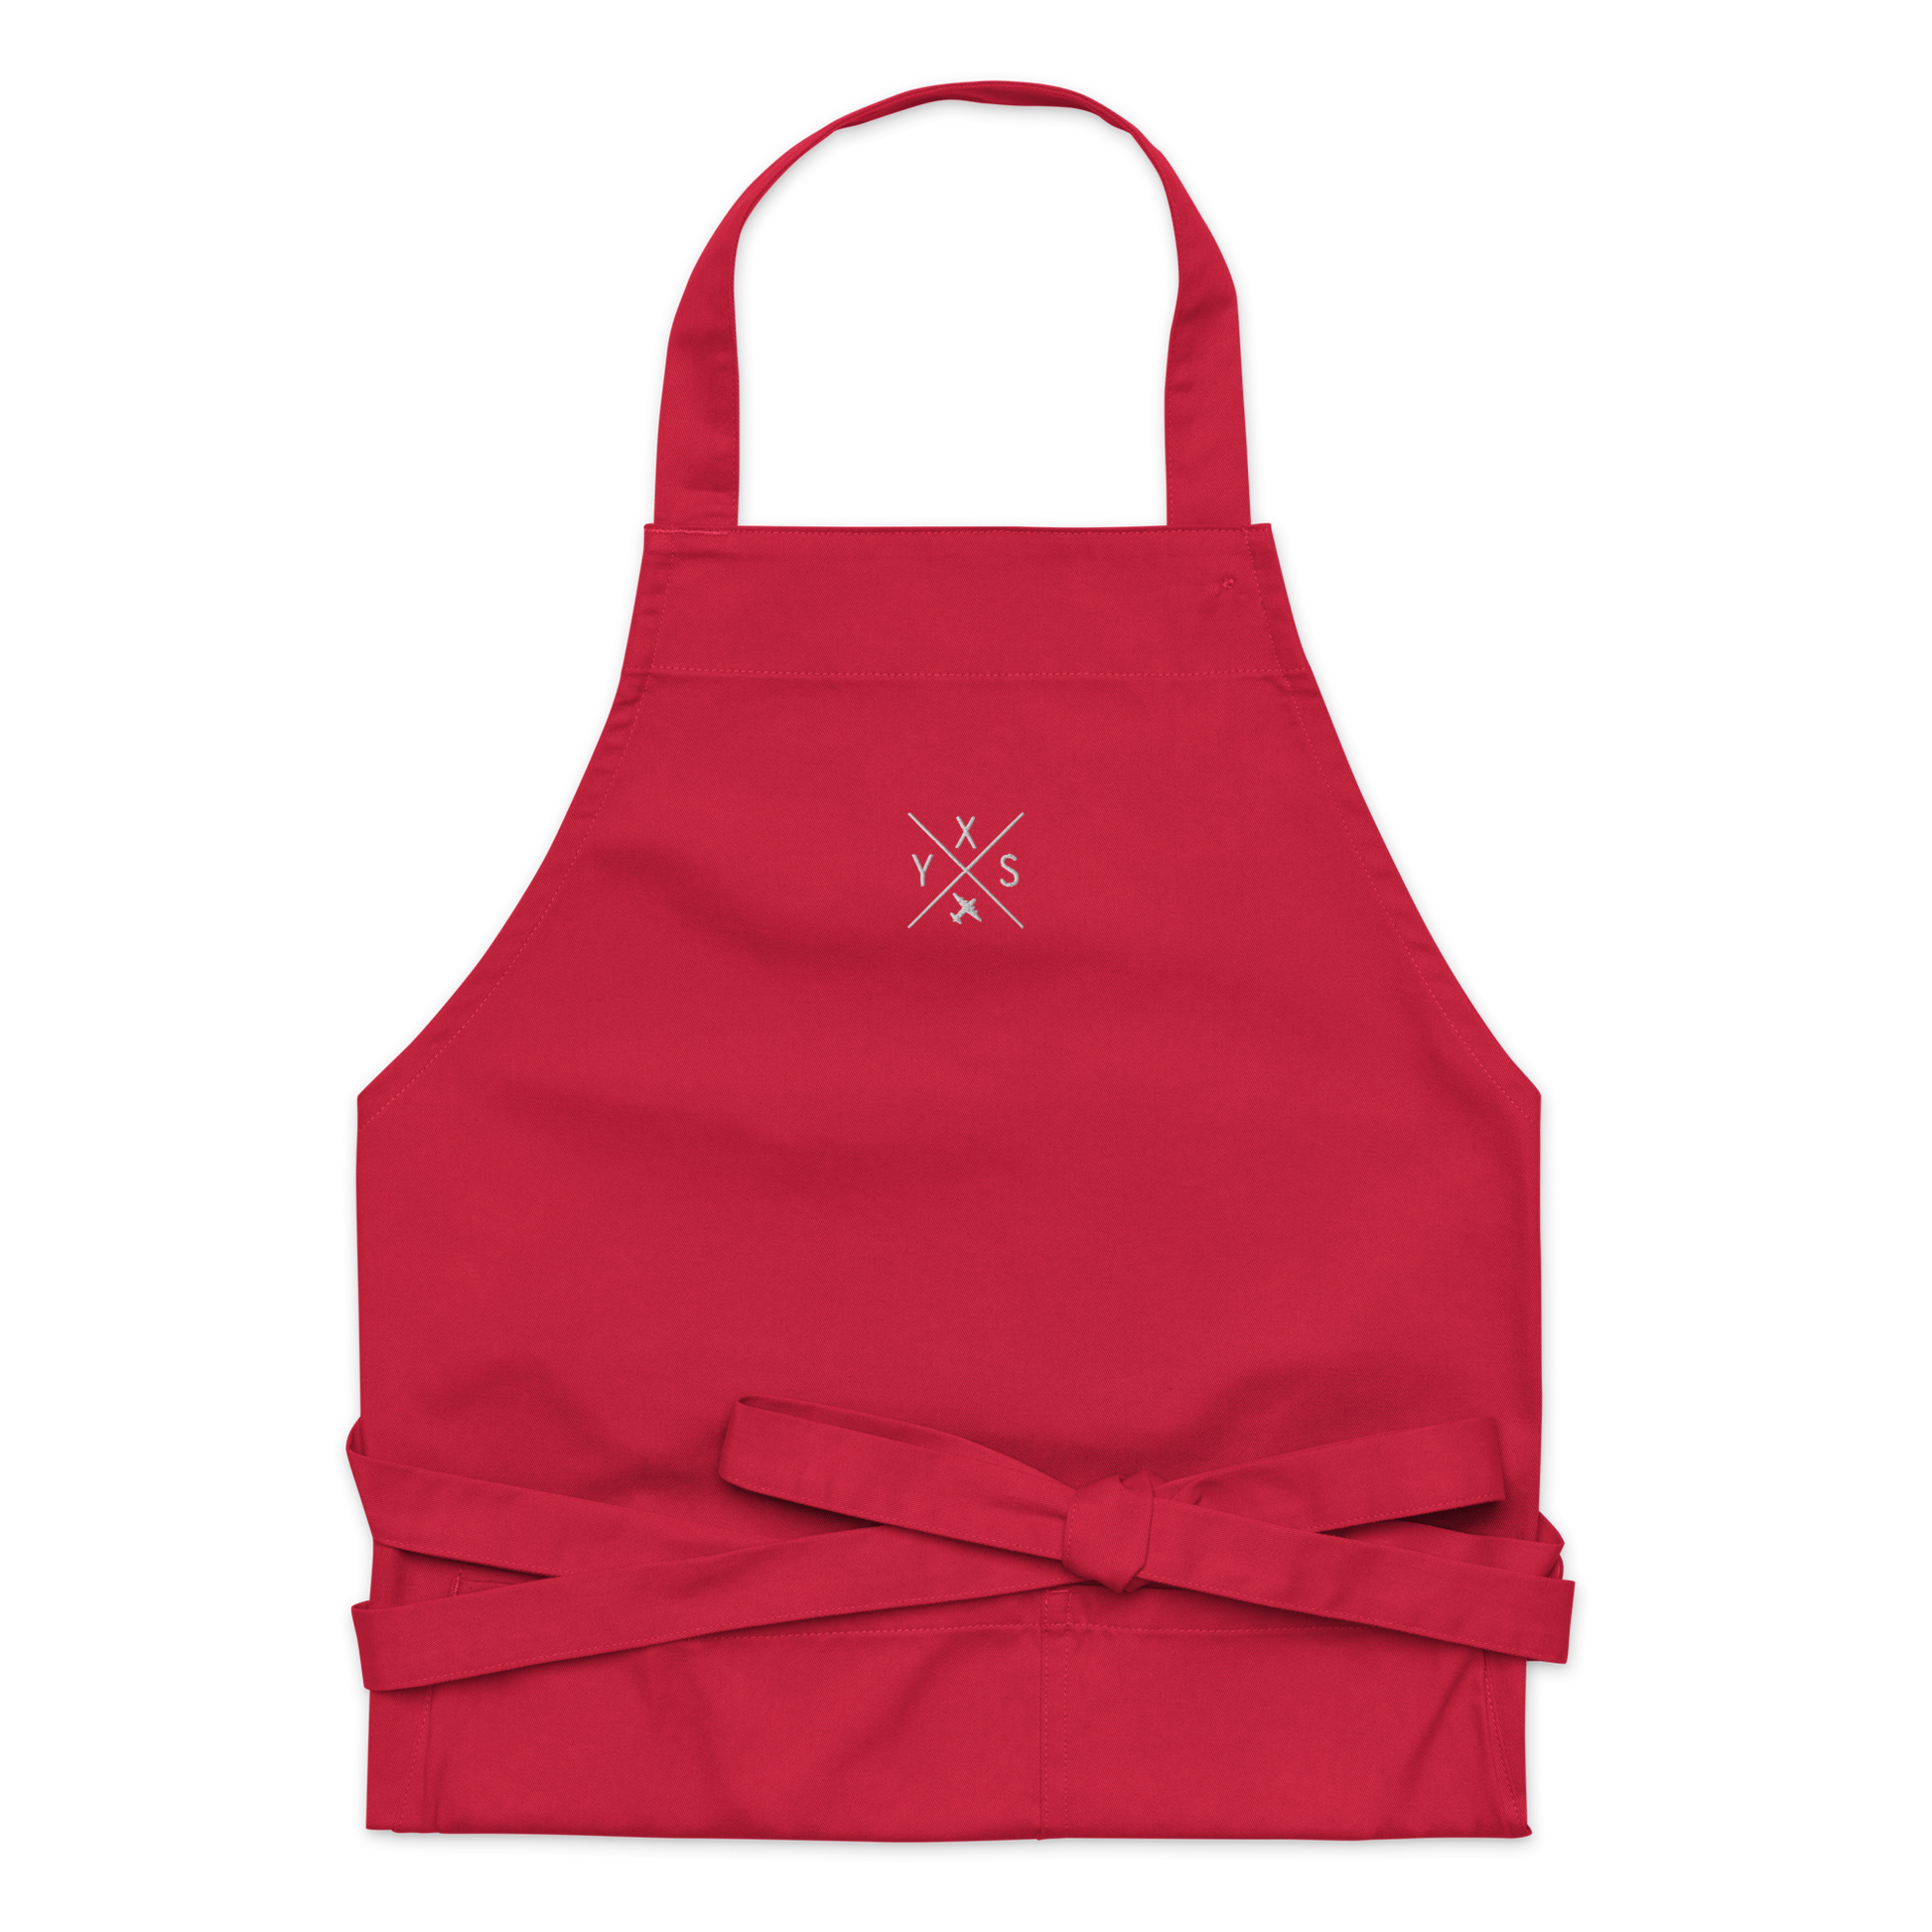 YHM Designs - YXS Prince George Organic Cotton Apron - Crossed-X Design with Airport Code and Vintage Propliner - White Embroidery - Image 05